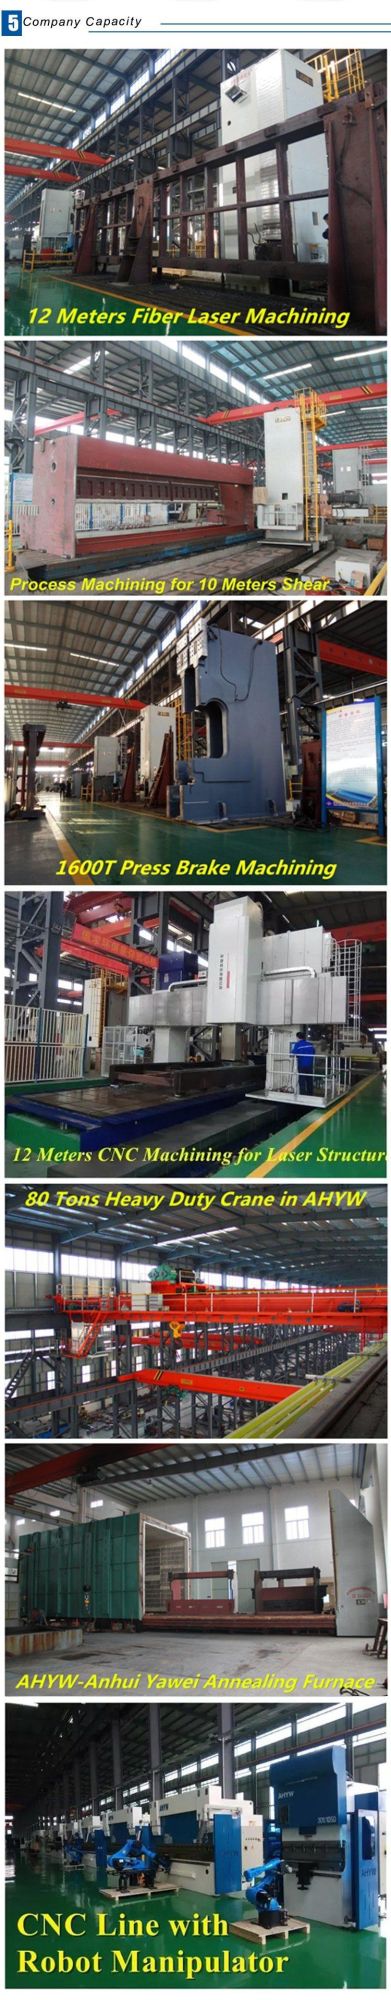 9-Meter-Long CNC Sheet Guillotine Shearing Machine with High Quality Blades